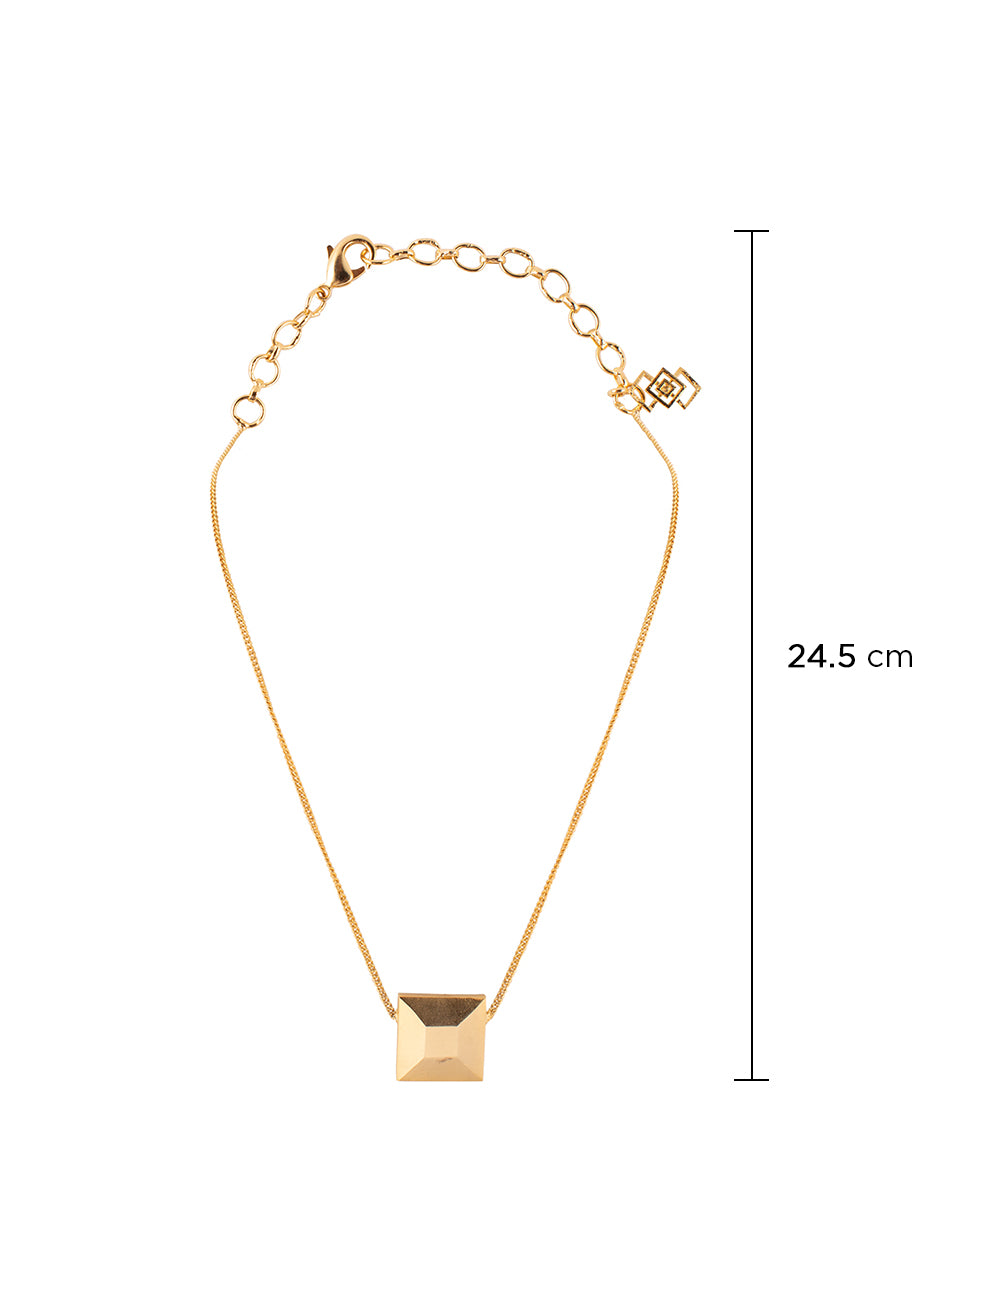 Cubicle Neckchain-24K Gold Plated